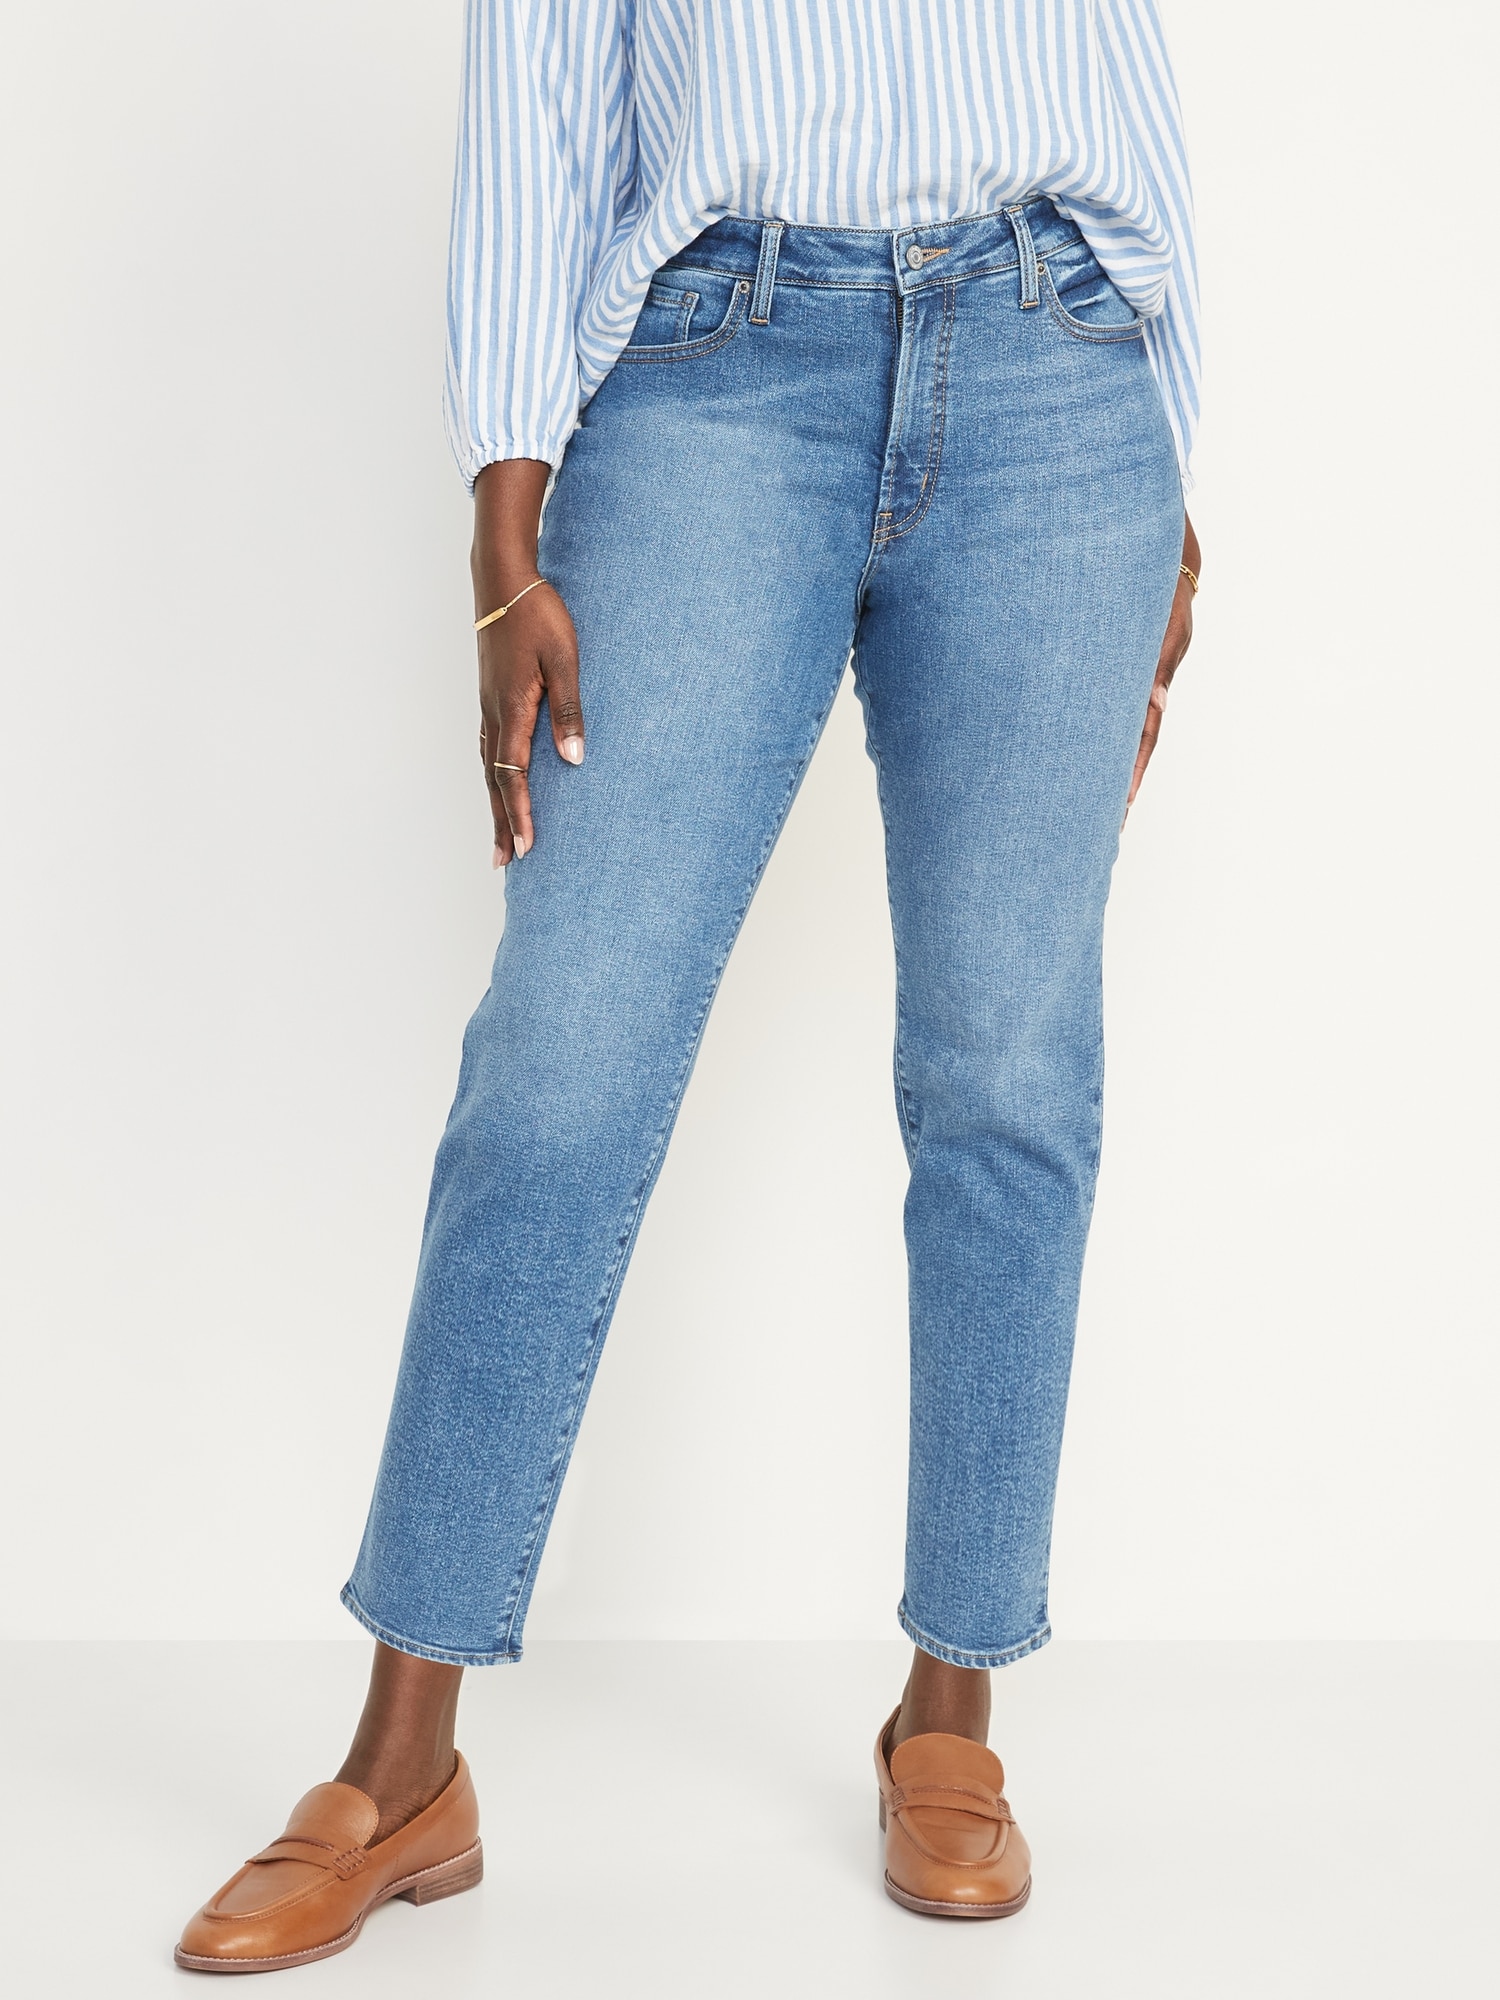 Old Navy Women's High-Waisted OG Straight Button-Fly Extra-Stretch Jeans - Blue - Plus Size 30